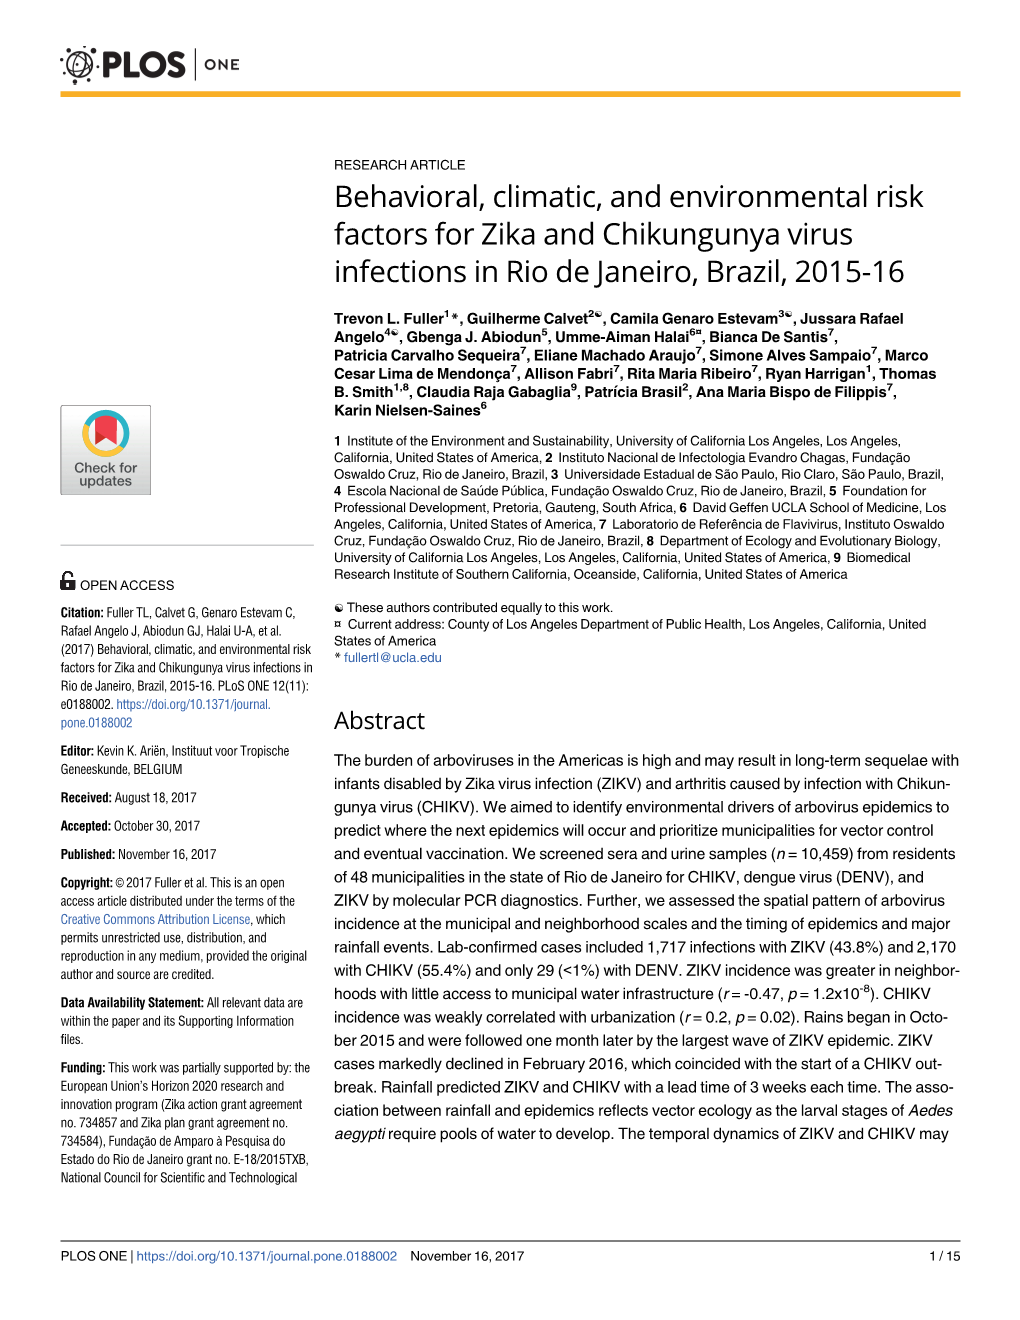 Behavioral, Climatic, and Environmental Risk Factors for Zika and Chikungunya Virus Infections in Rio De Janeiro, Brazil, 2015-16